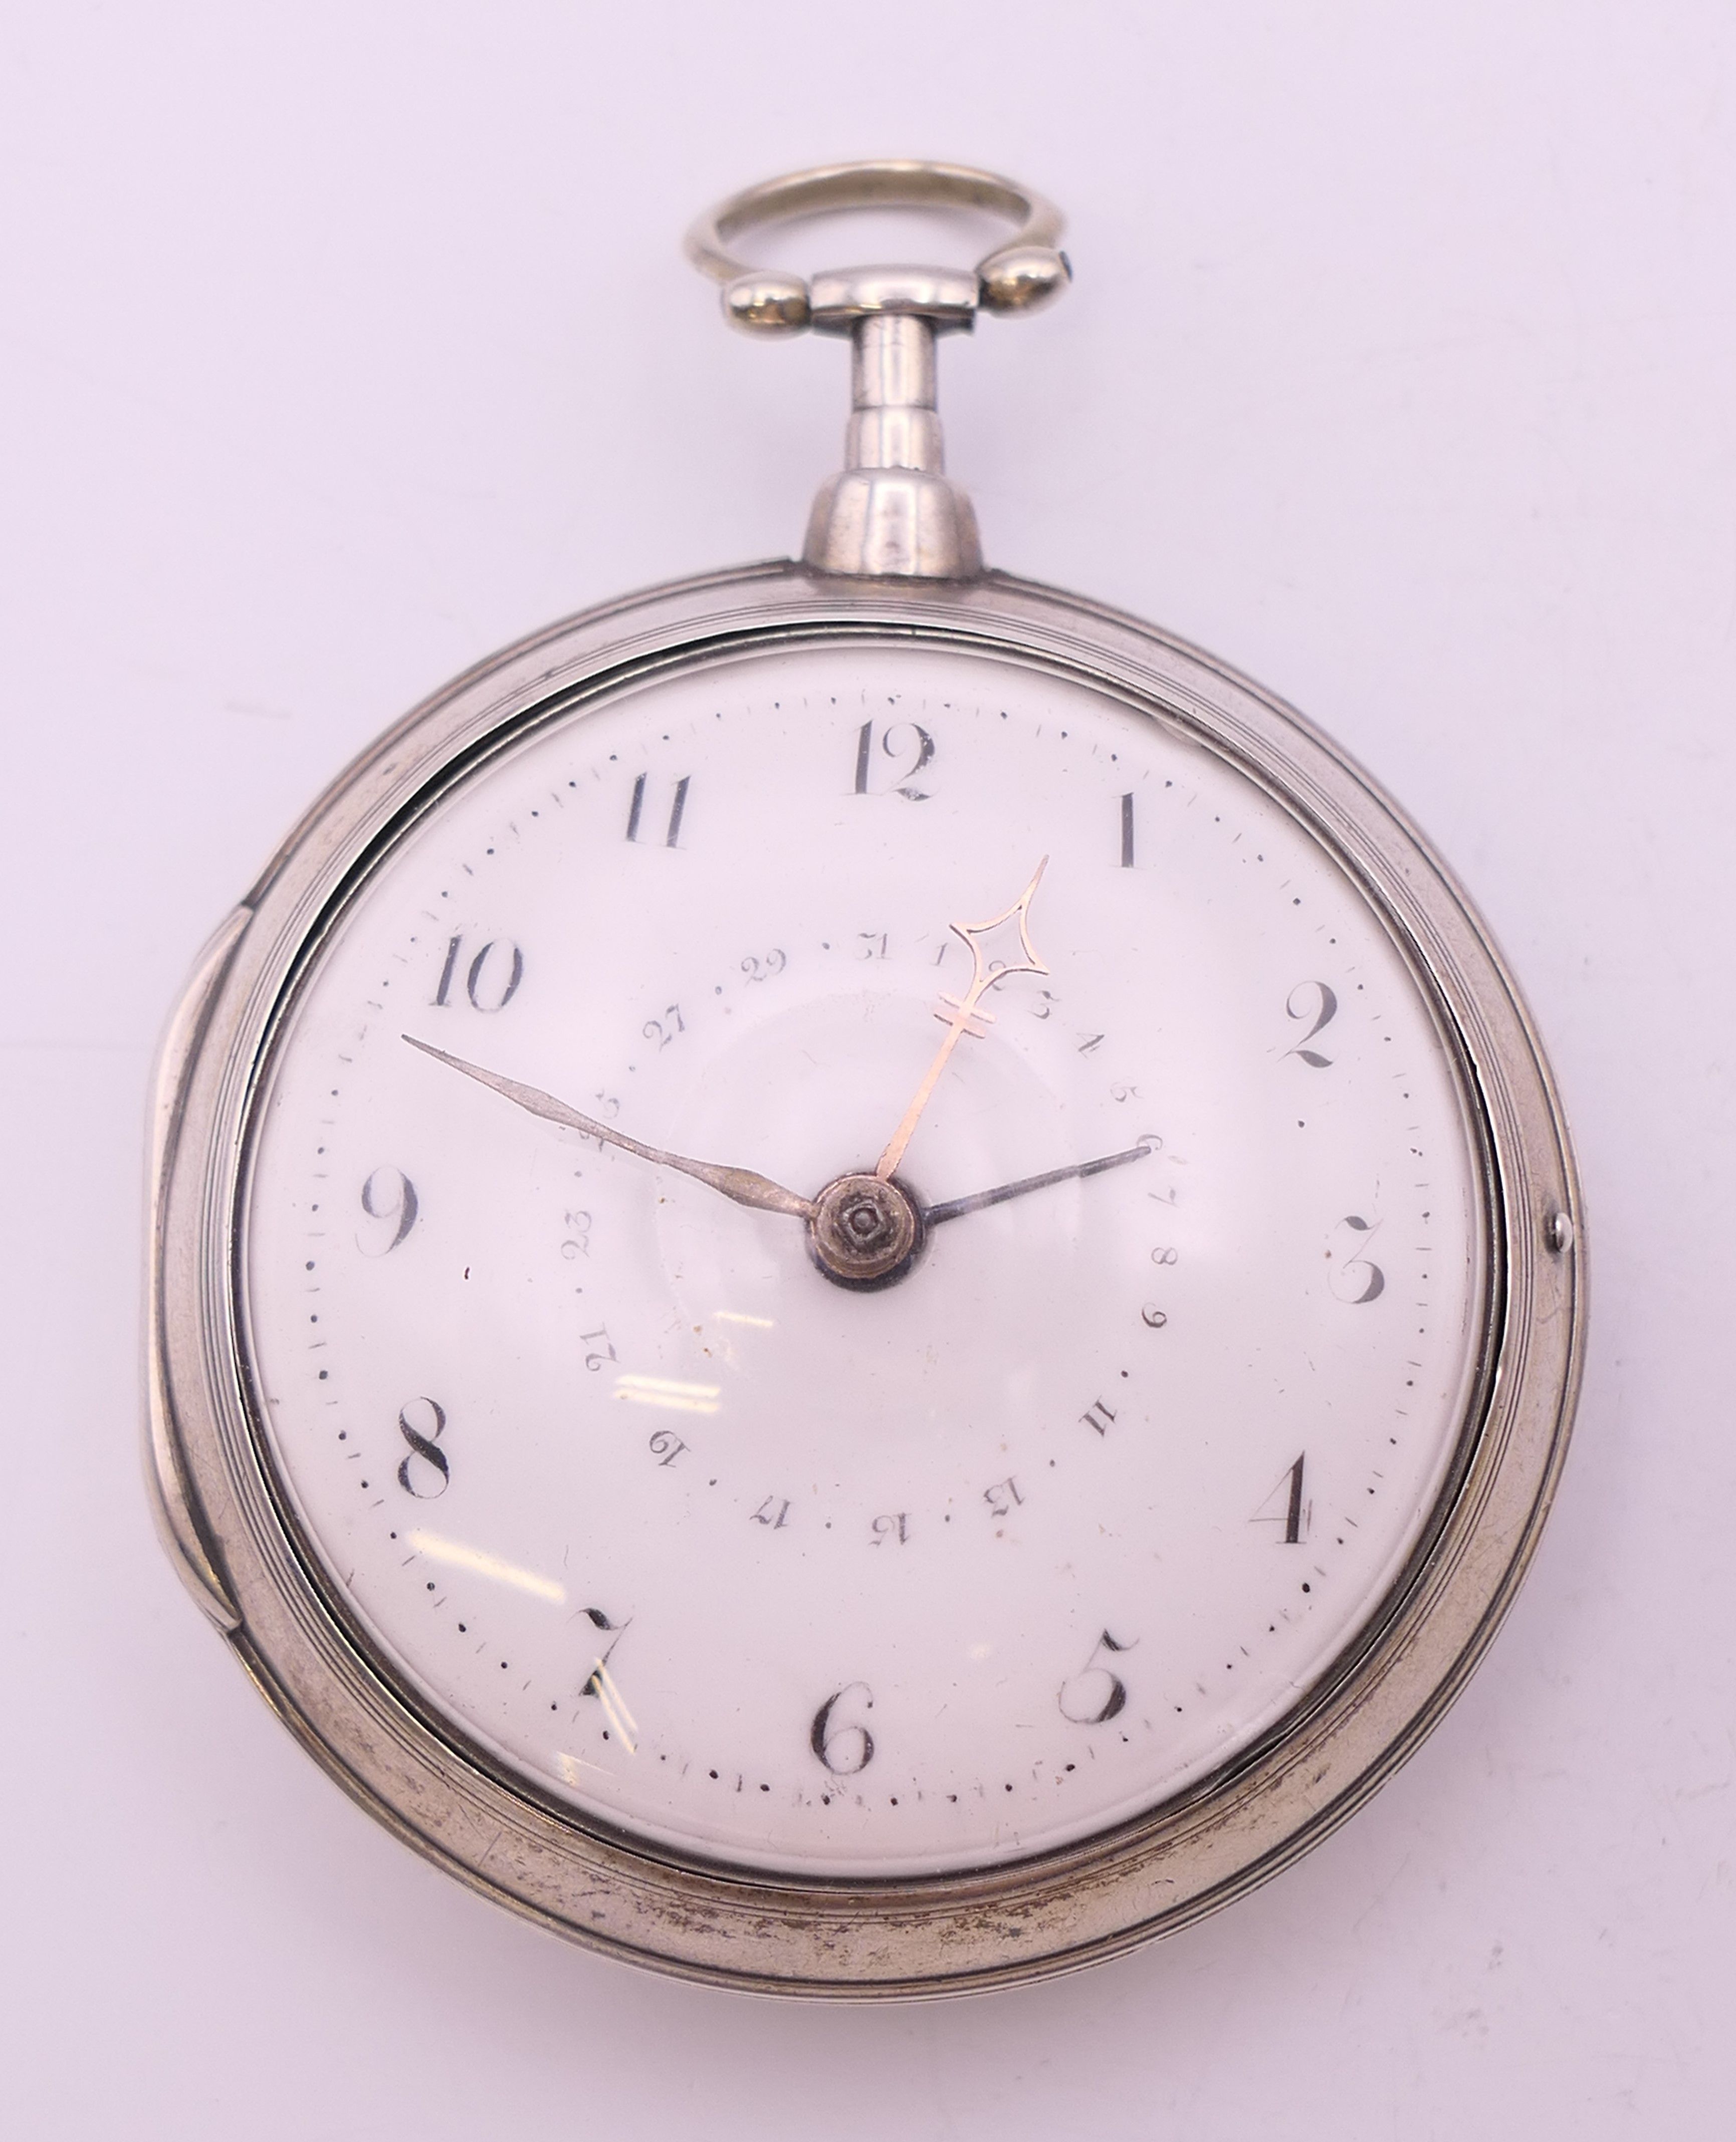 A Jacob Sumpter Dook silver pair cased pocket watch, the movement with engraved Masonic emblem. 5.